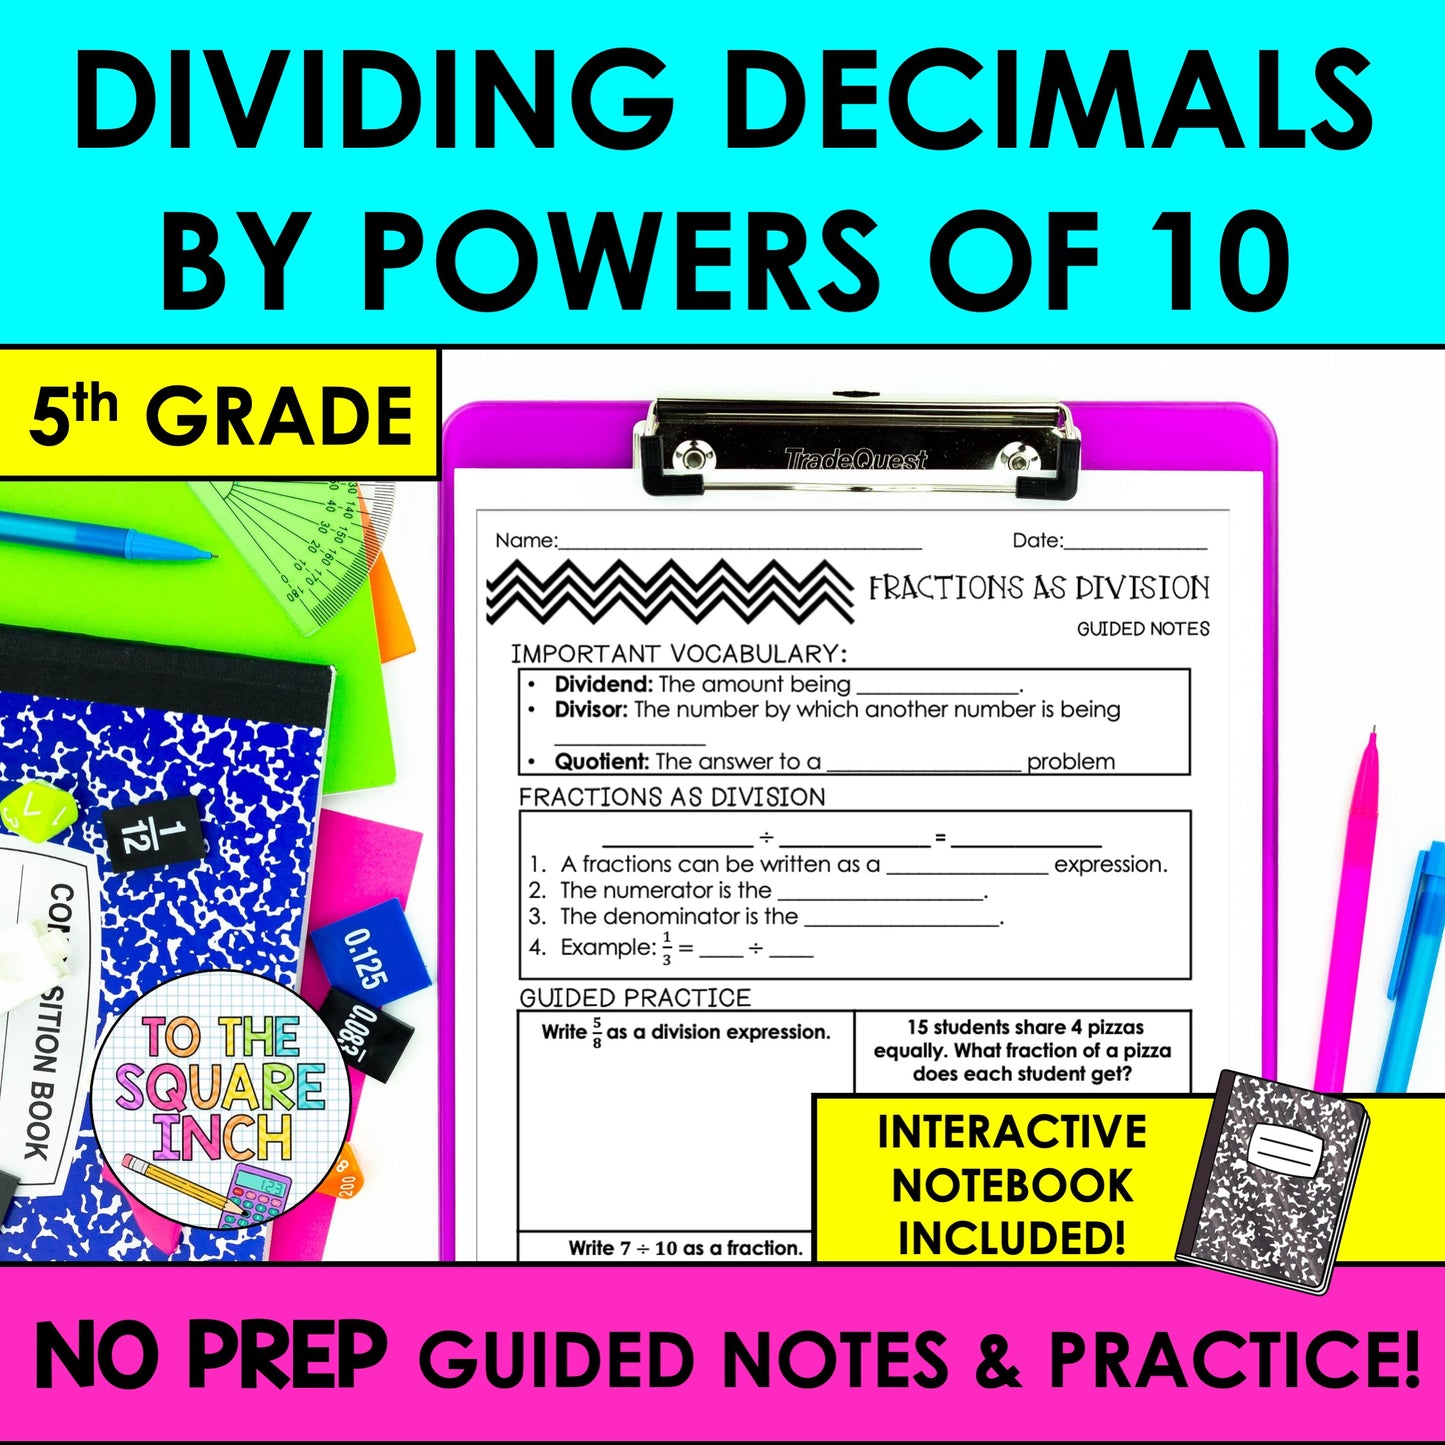 Dividing Decimals by Powers of 10 Notes